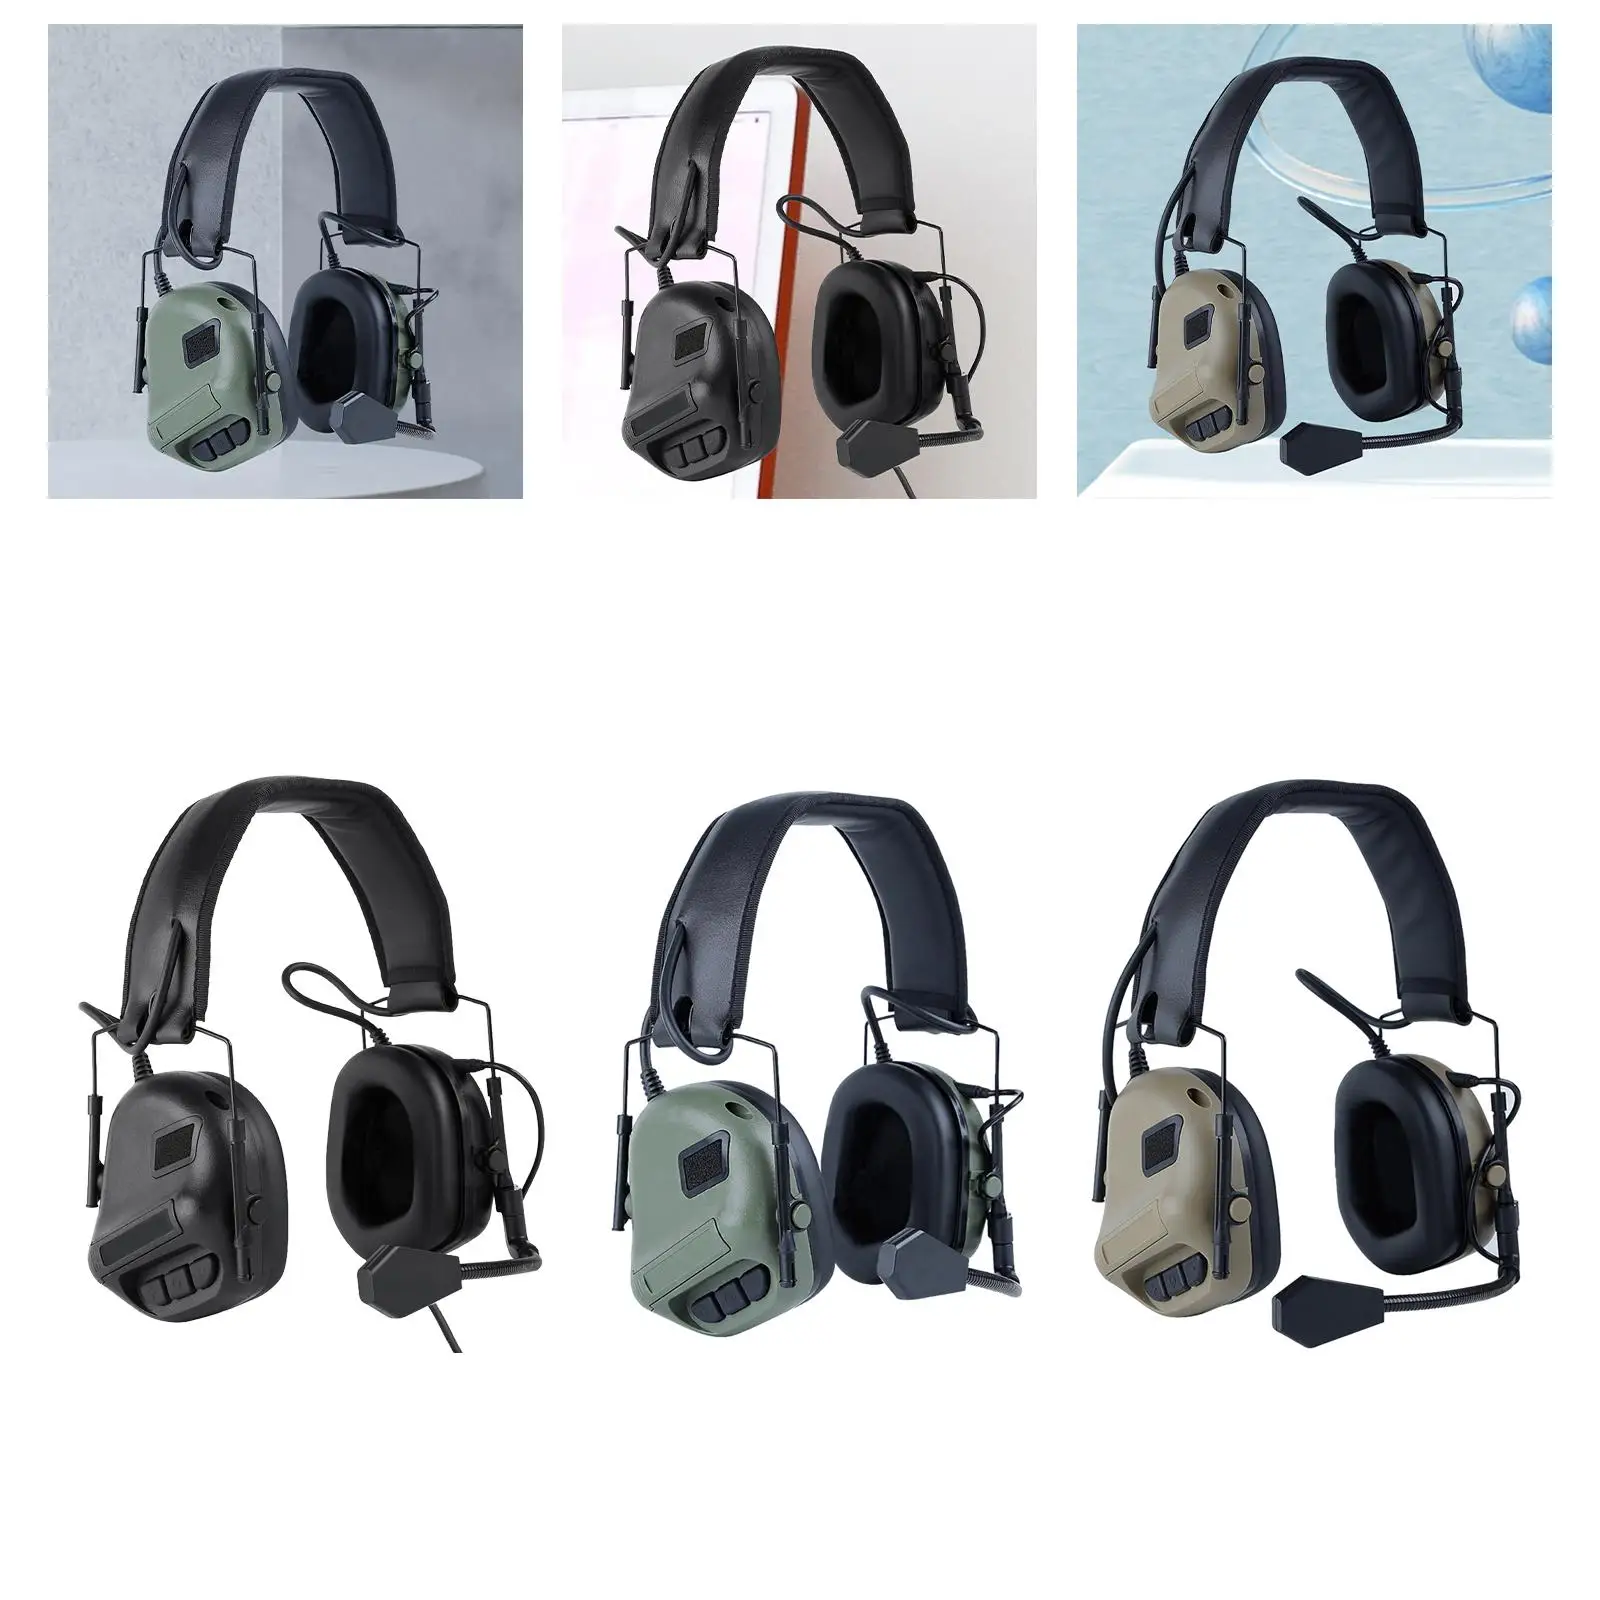 Hearing Ear Protection Soft Ear Protector Ear Covers Protective Earmuffs for Learning Airplane Construction Lawn Mowing Concerts